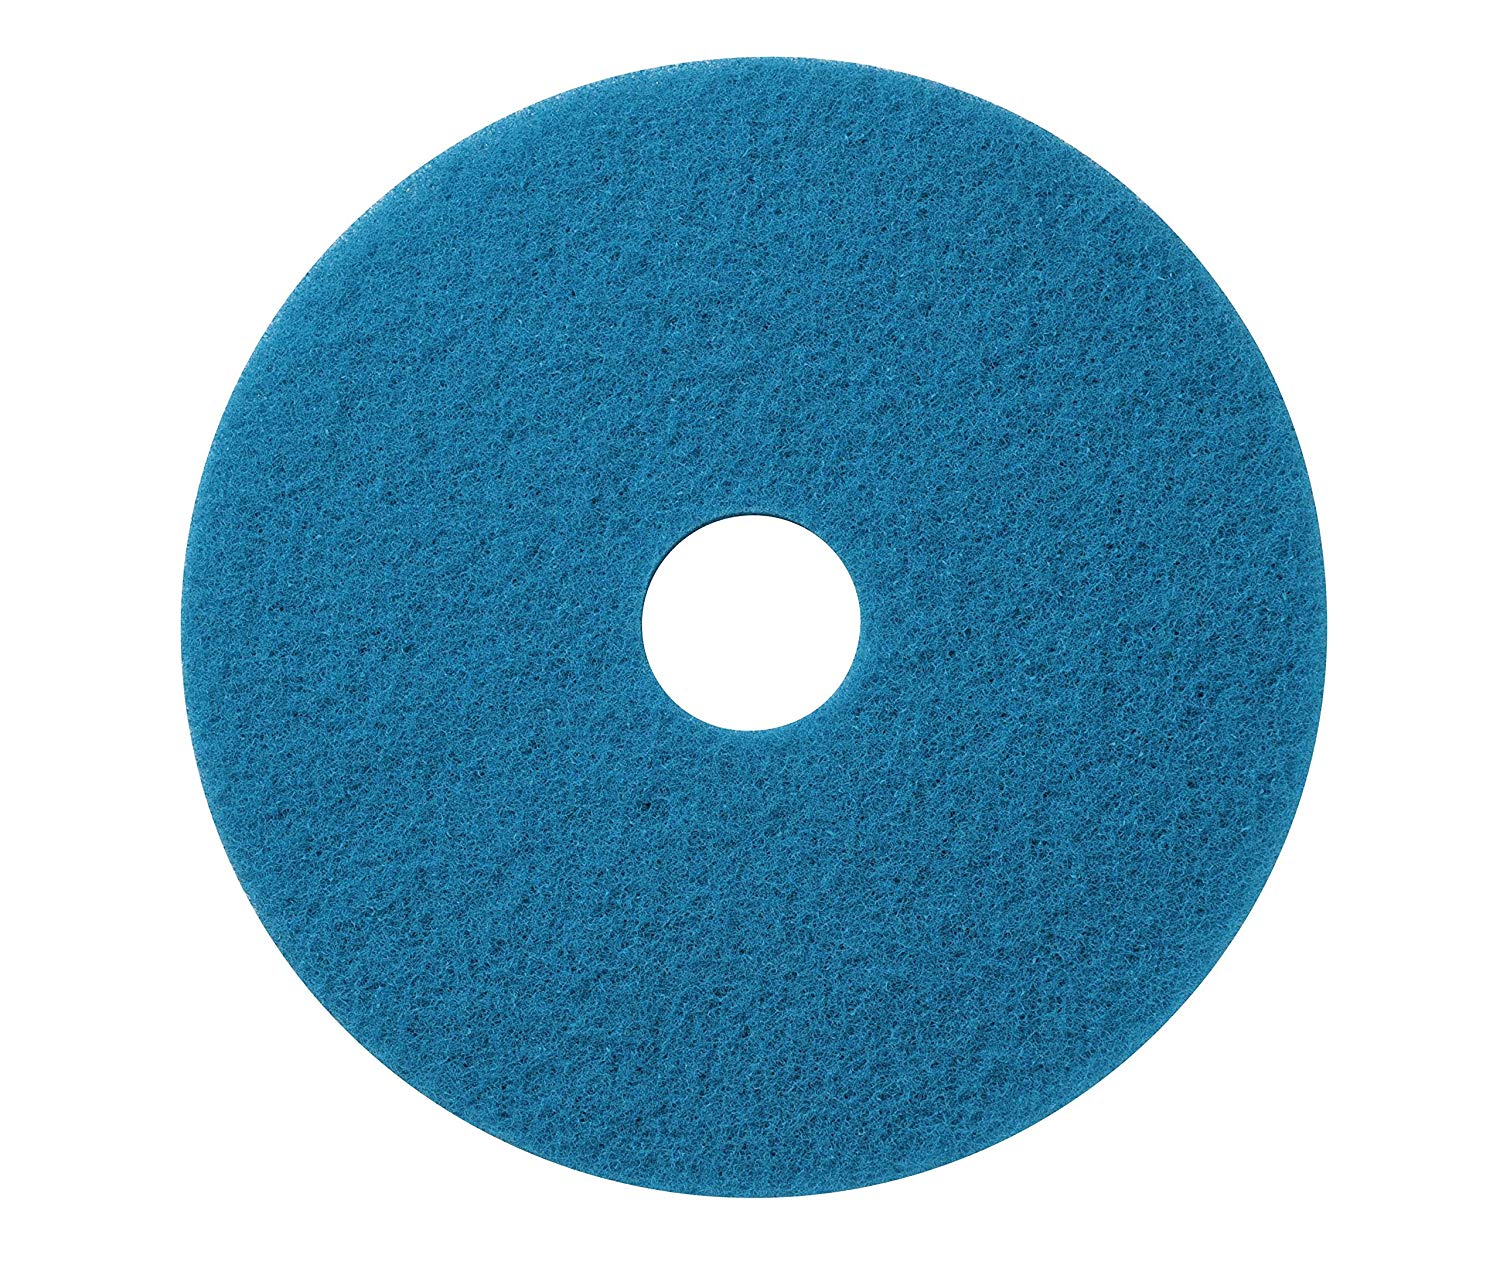 Americo Manufacturing 400417 Blue Cleaner Floor Scrubbing Pad (5 Pack), 17" - CalCleaningEquipment